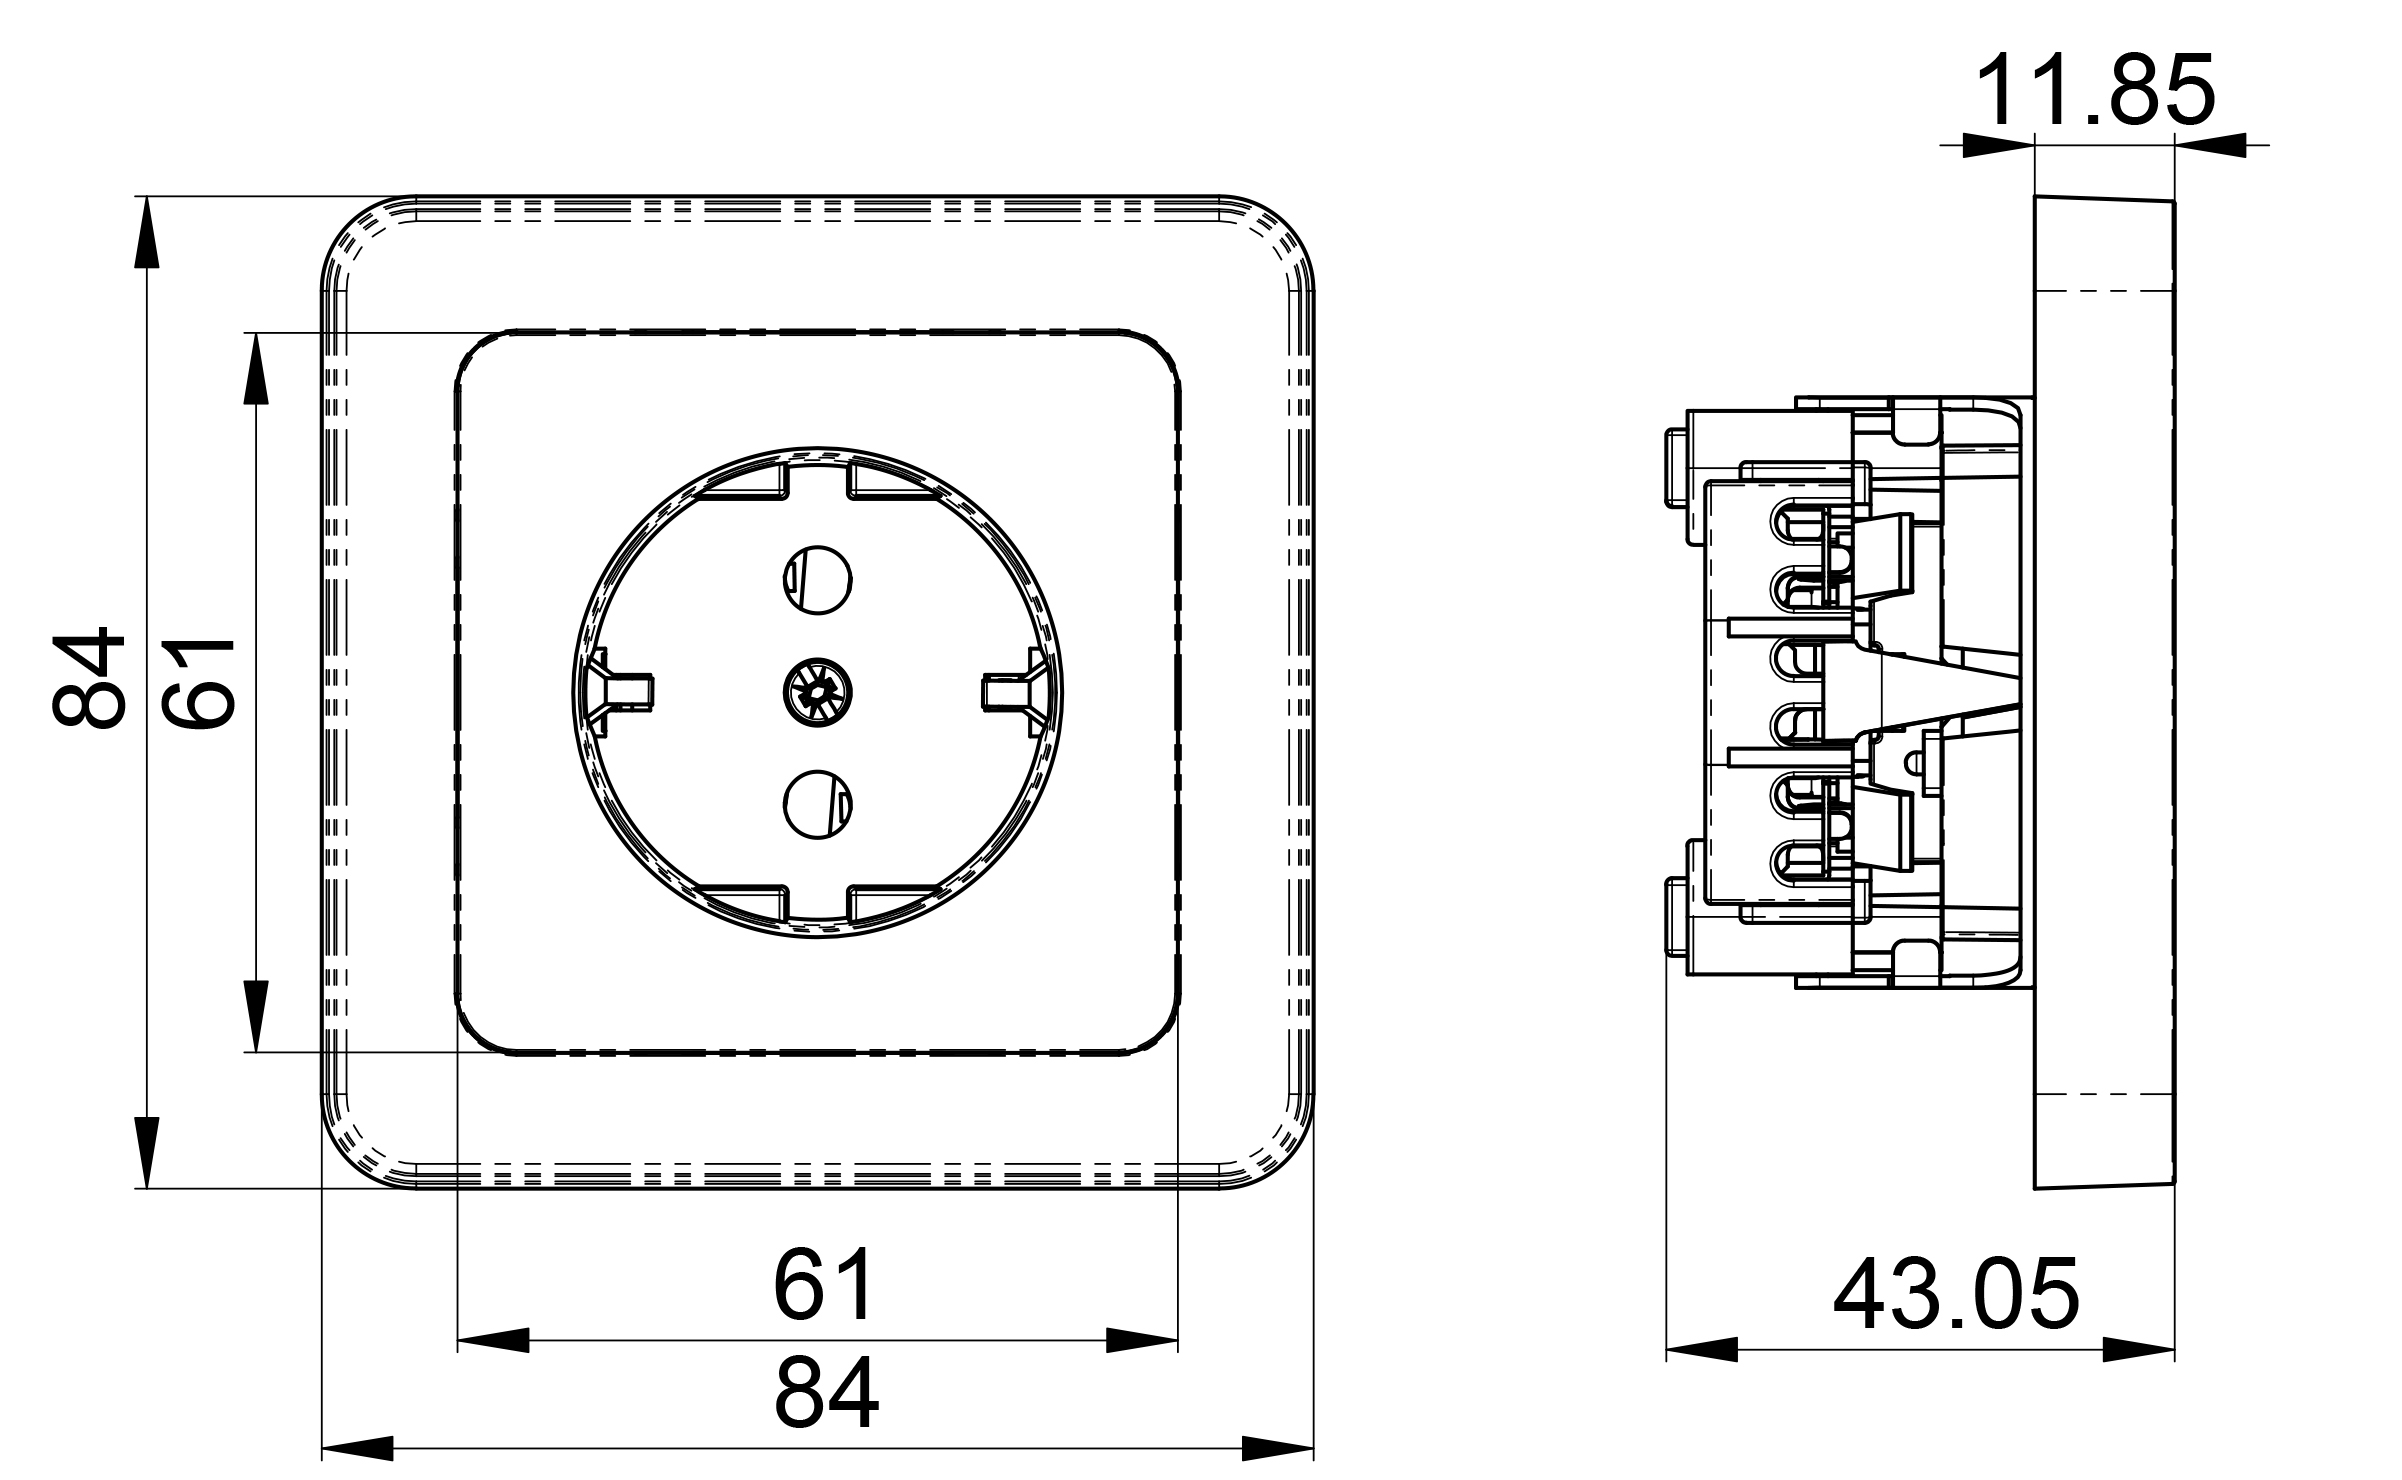 Flush-type wall socket outlet for fixed installation